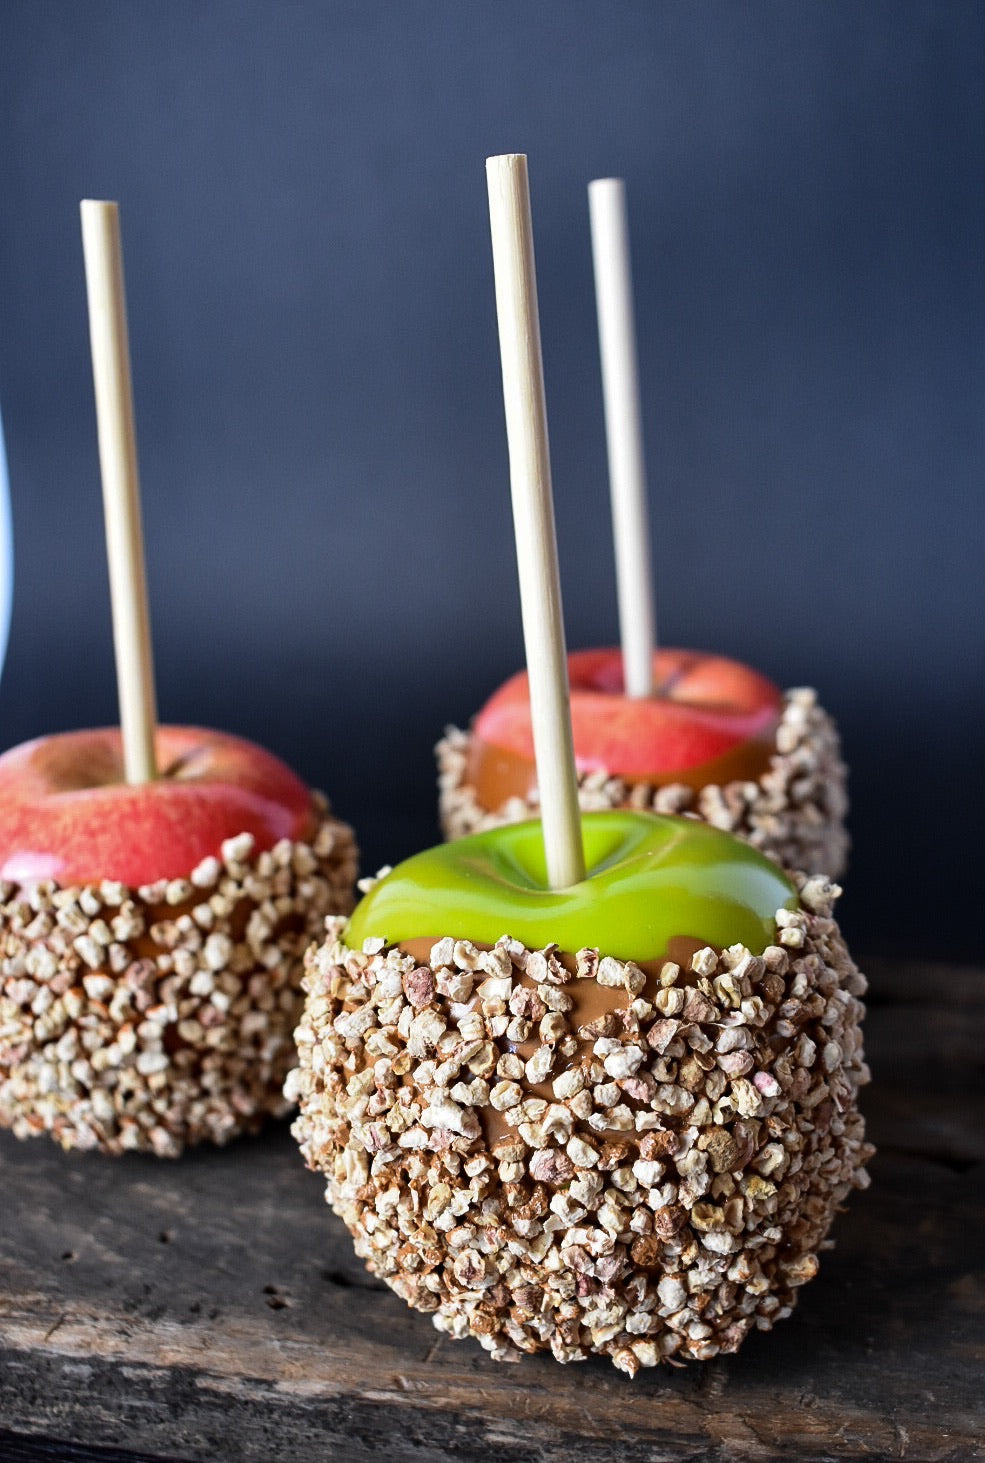 Permanent Caramel Apple with Nuts